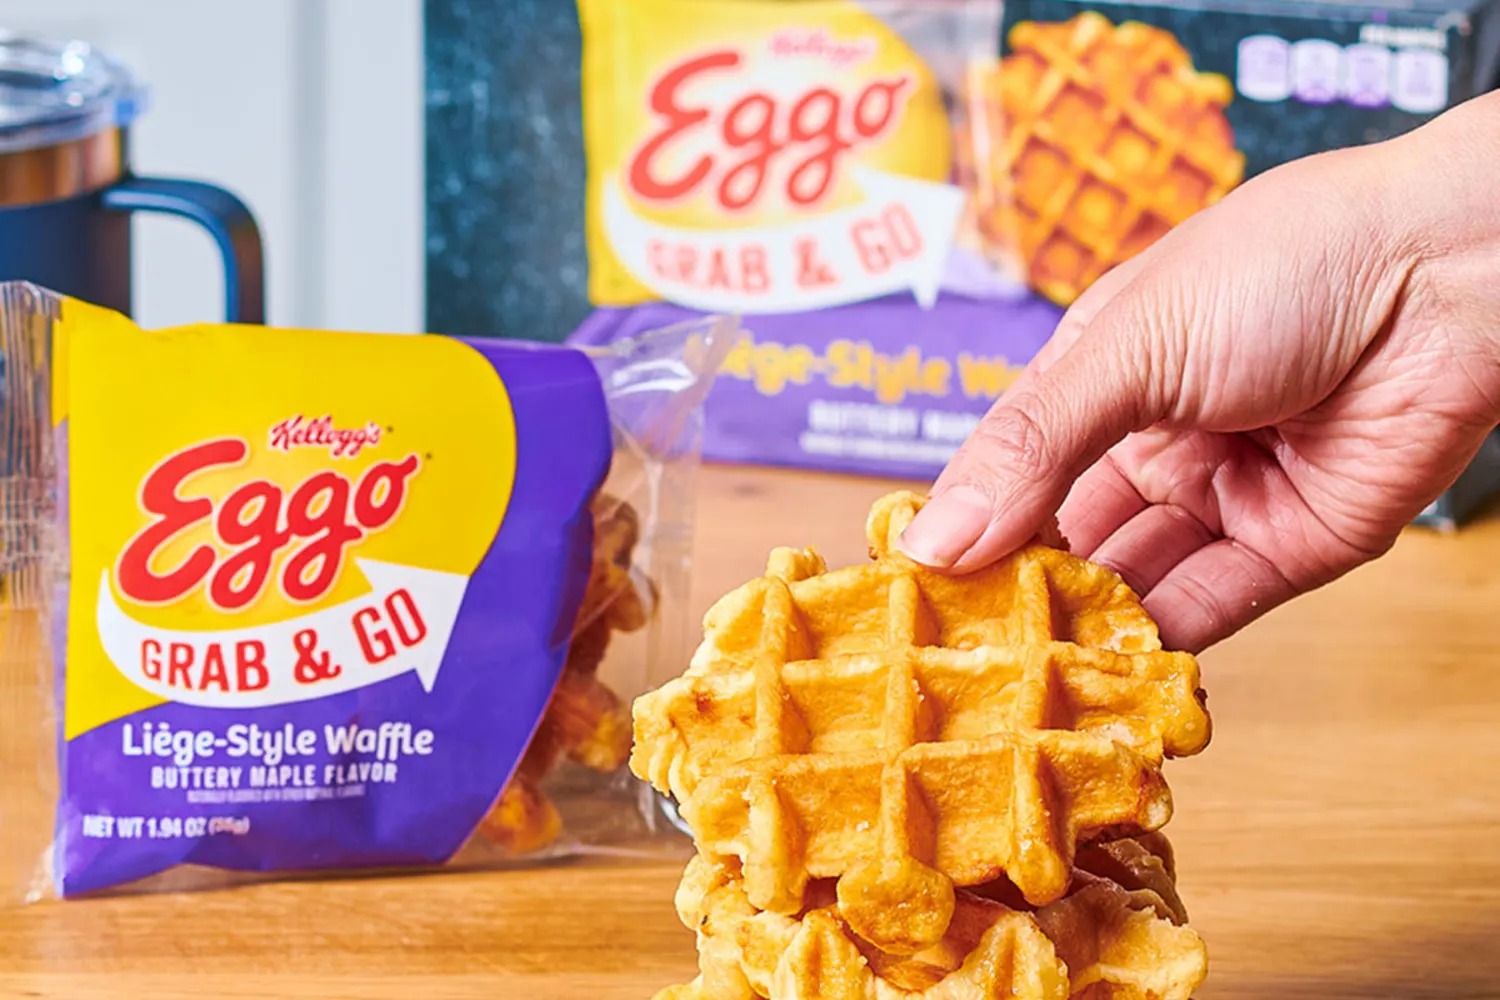 15 Eggos Waffles Nutrition Facts 